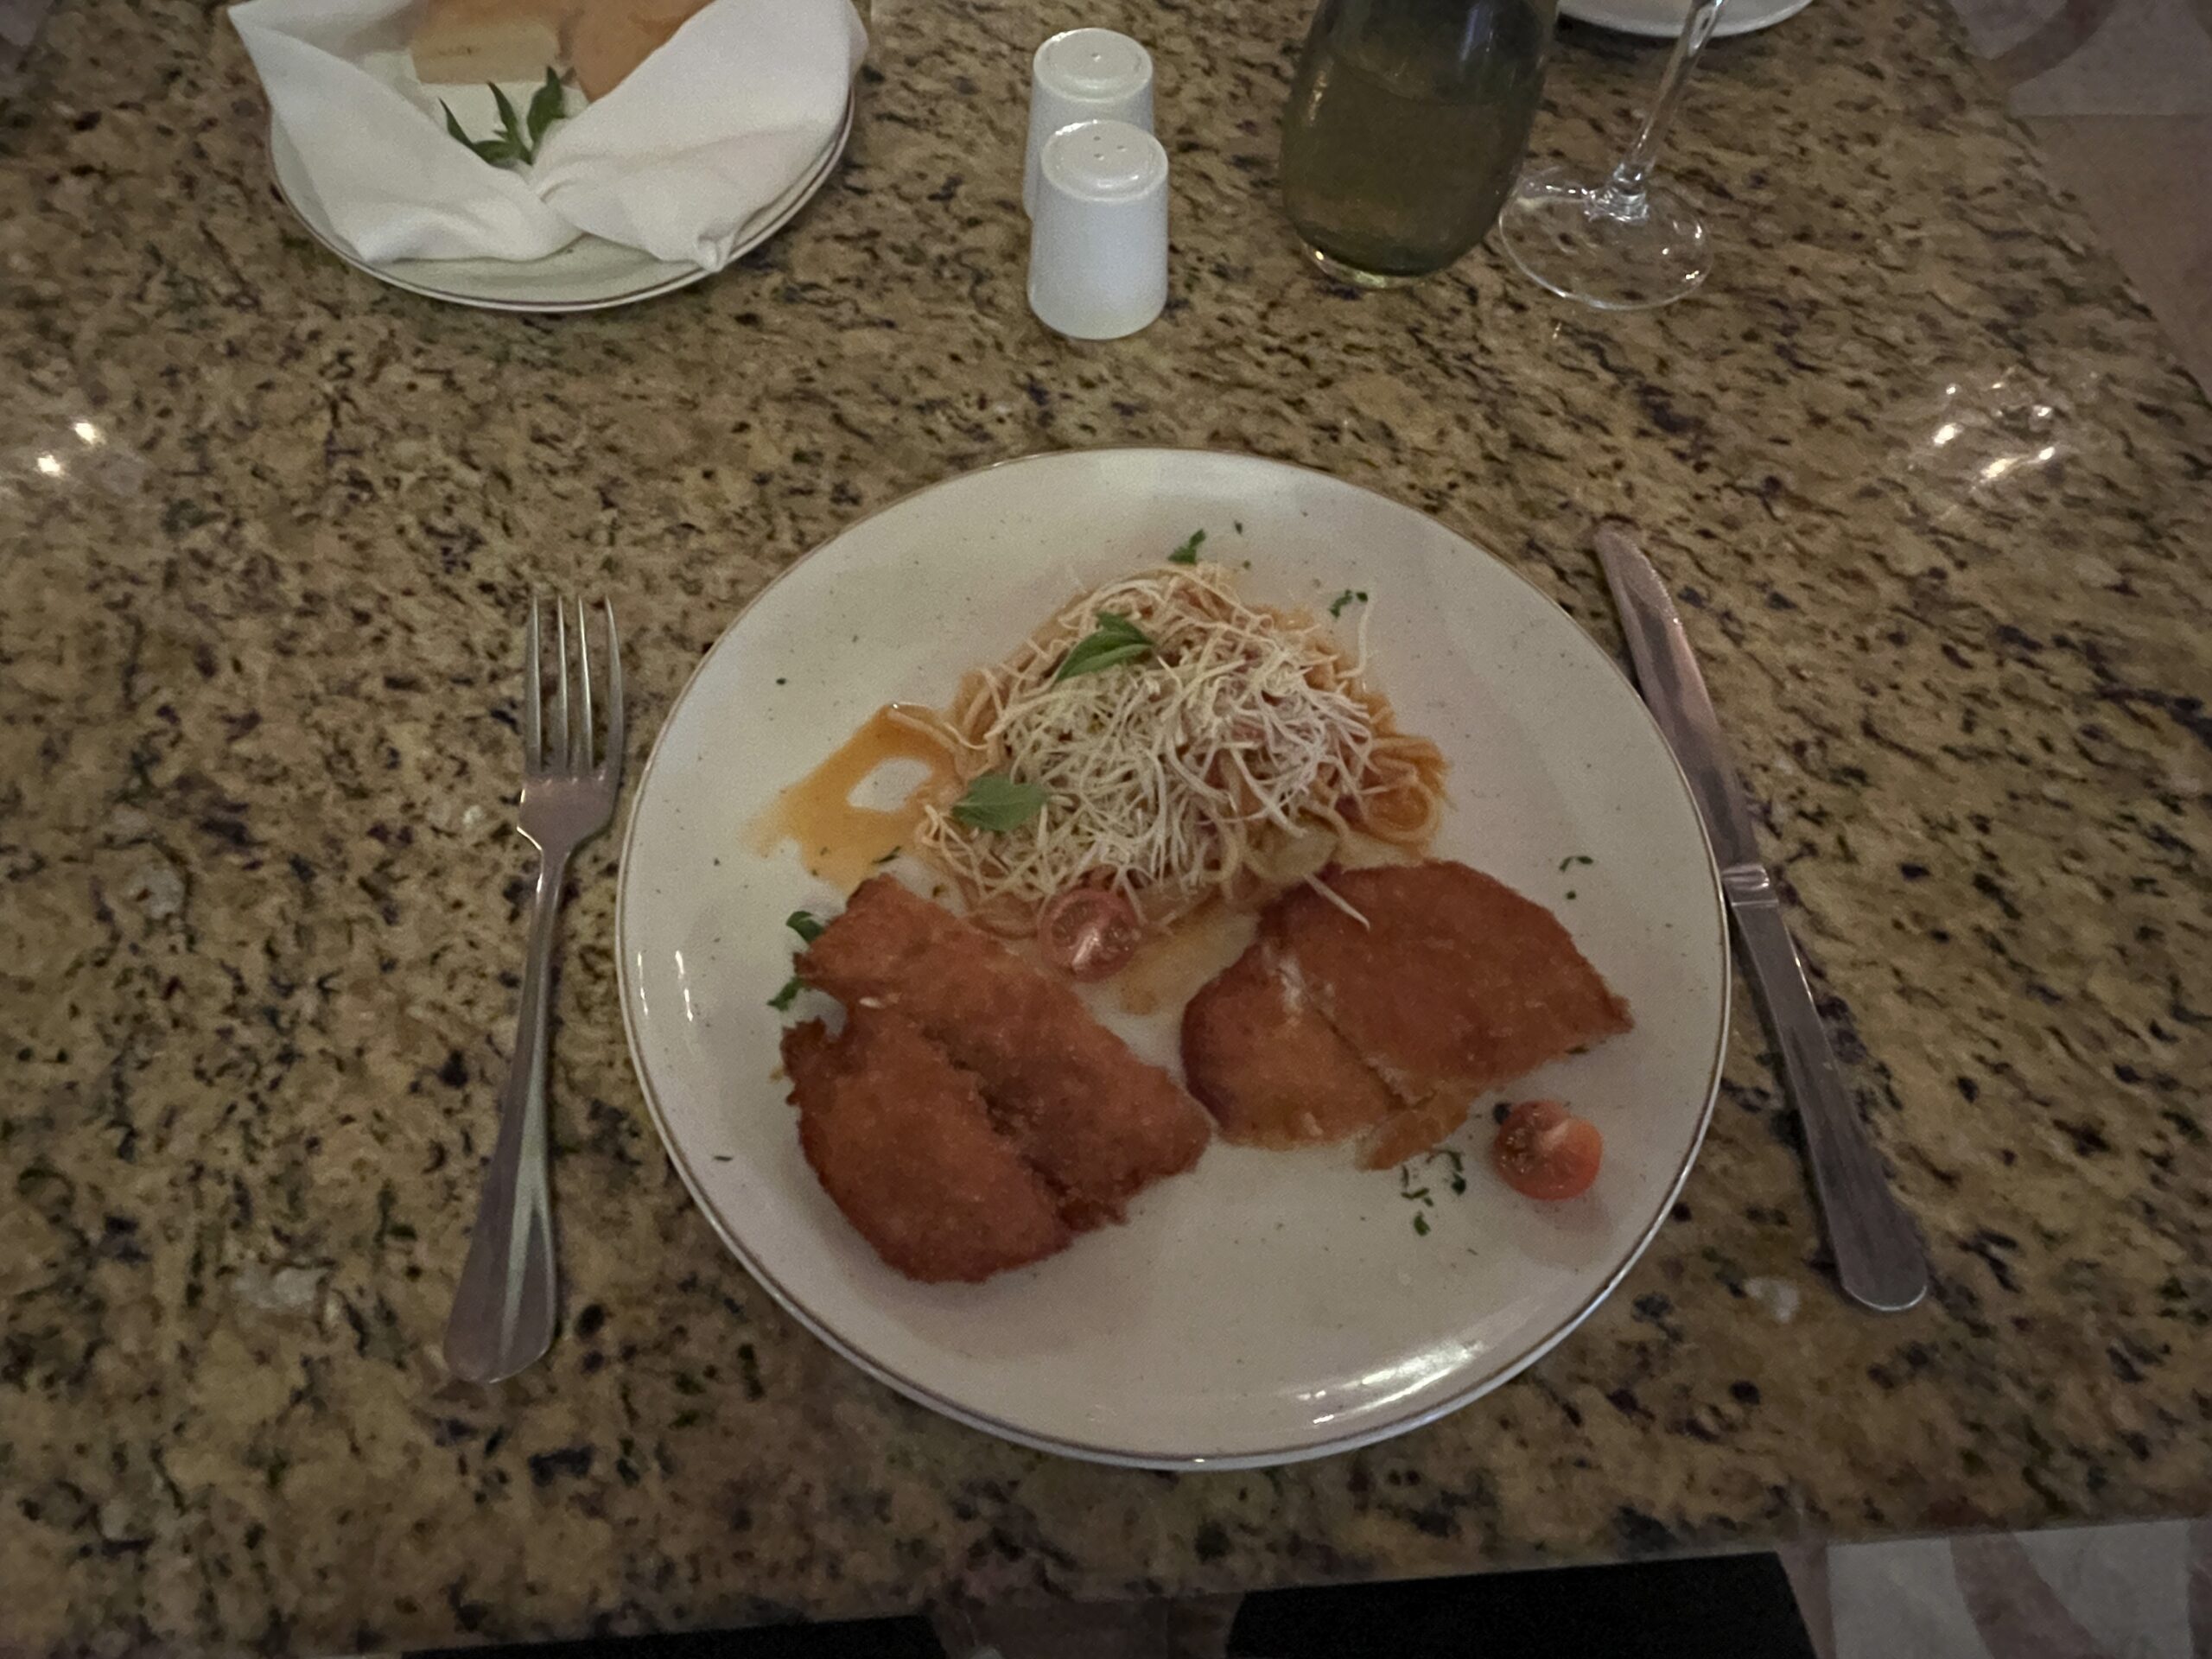 I love chicken parm. The sauce at Sensira was lacking in flavor but the breading was spot on